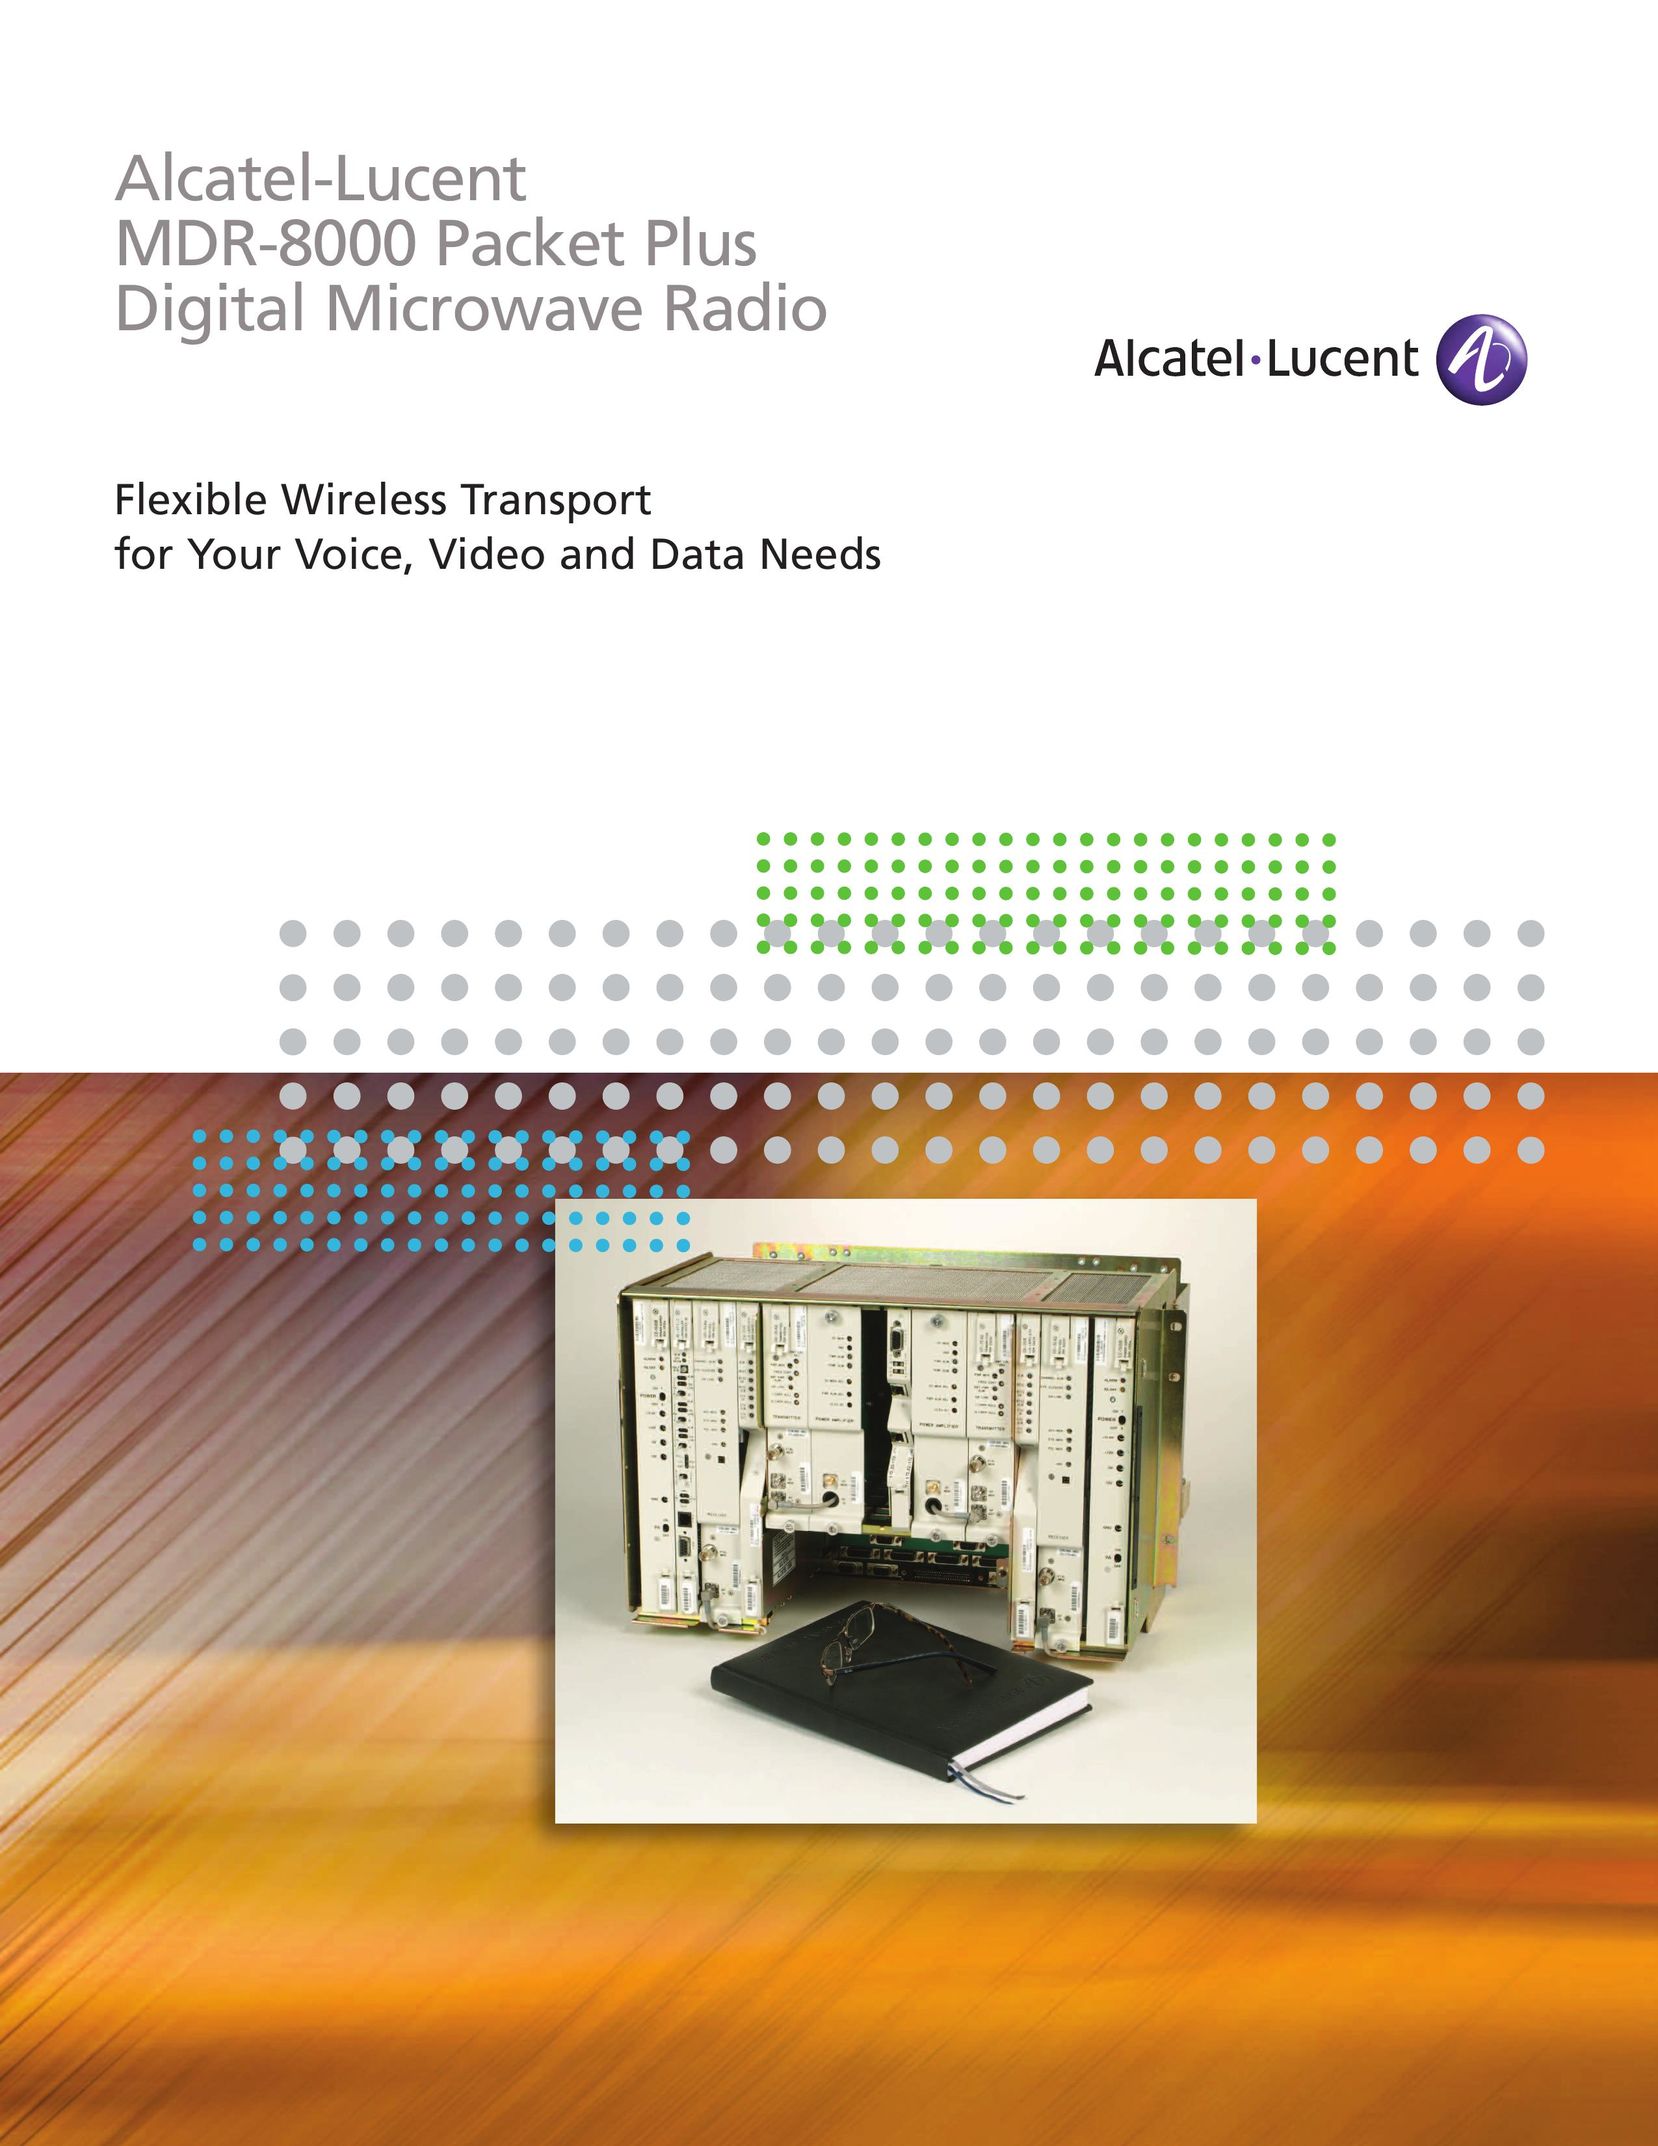 Alcatel-Lucent MDR-8000 Network Card User Manual